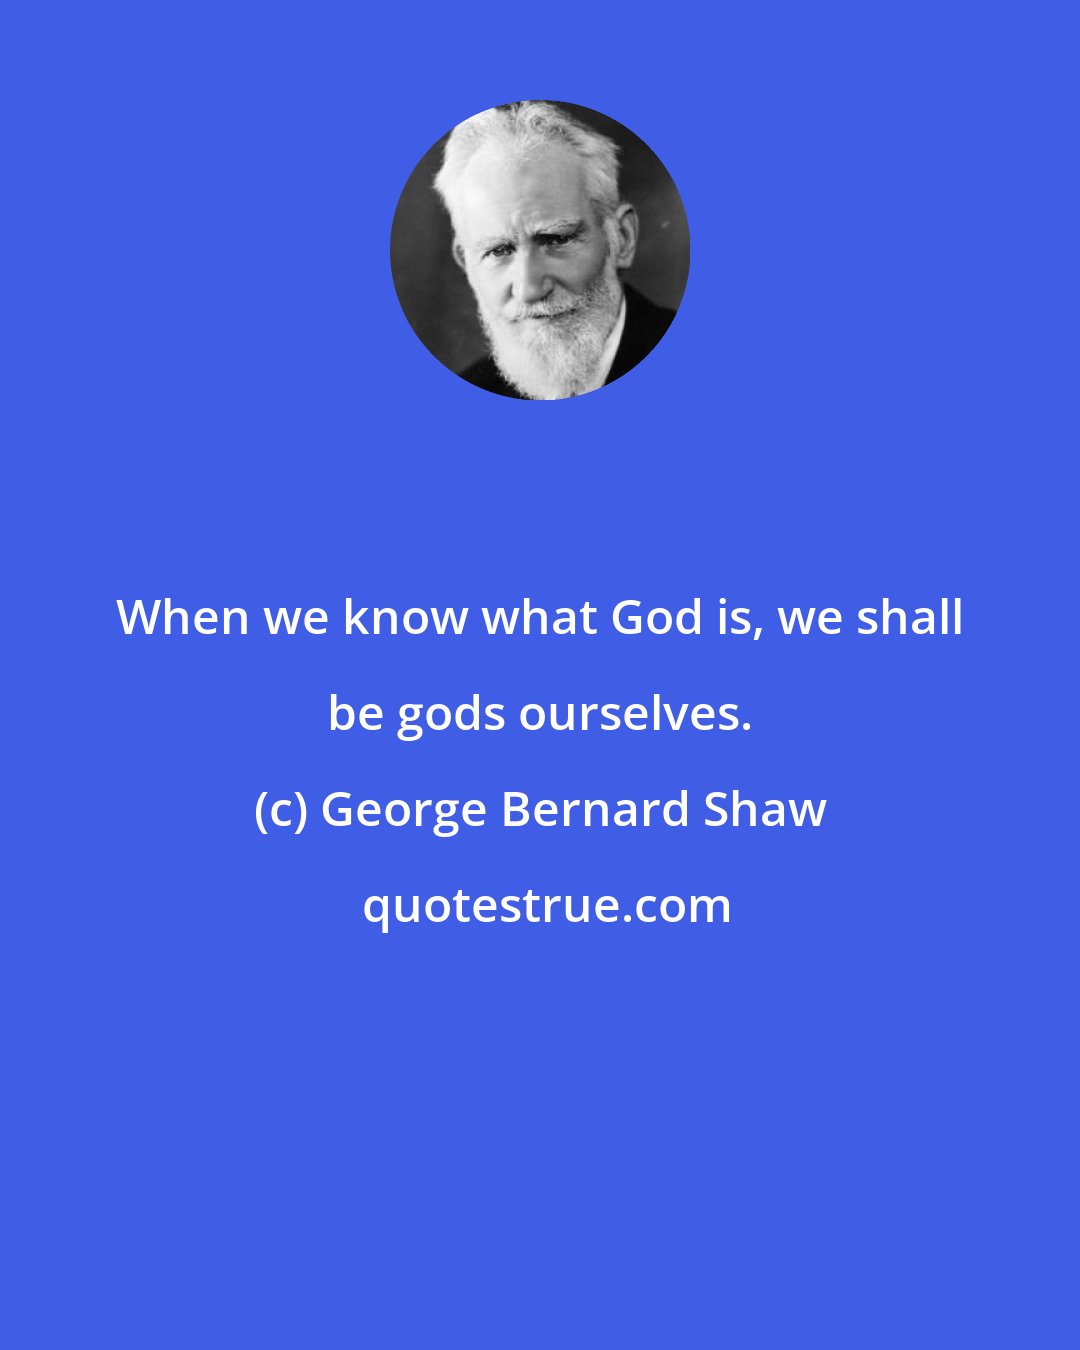 George Bernard Shaw: When we know what God is, we shall be gods ourselves.